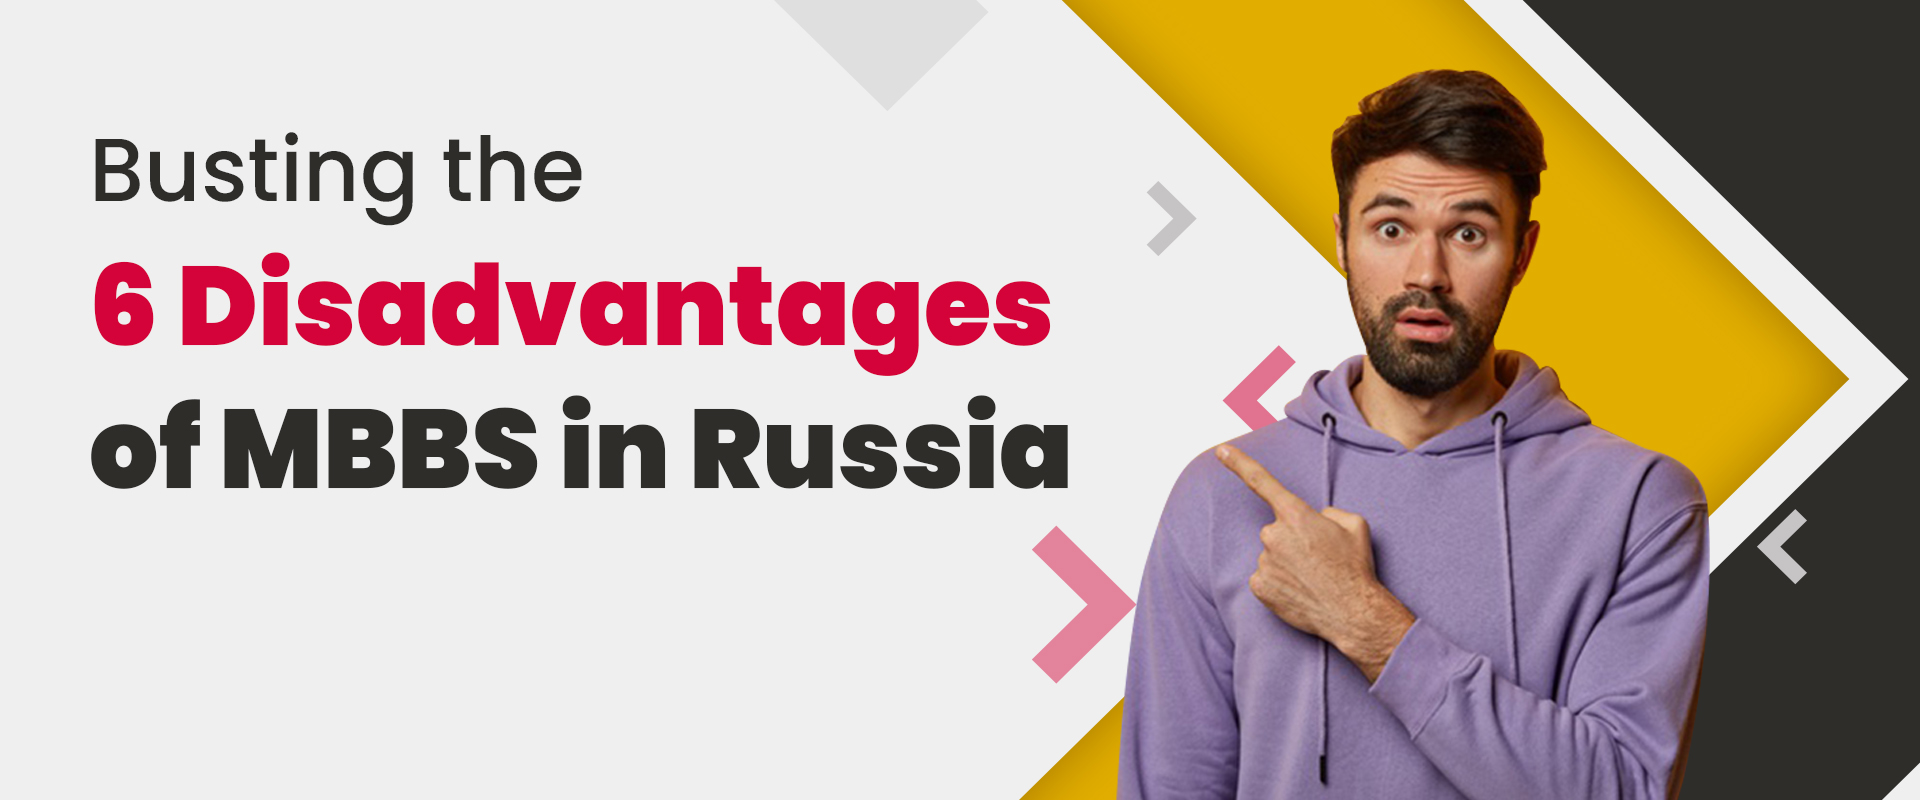 Busting the 6 Disadvantages of MBBS in Russia